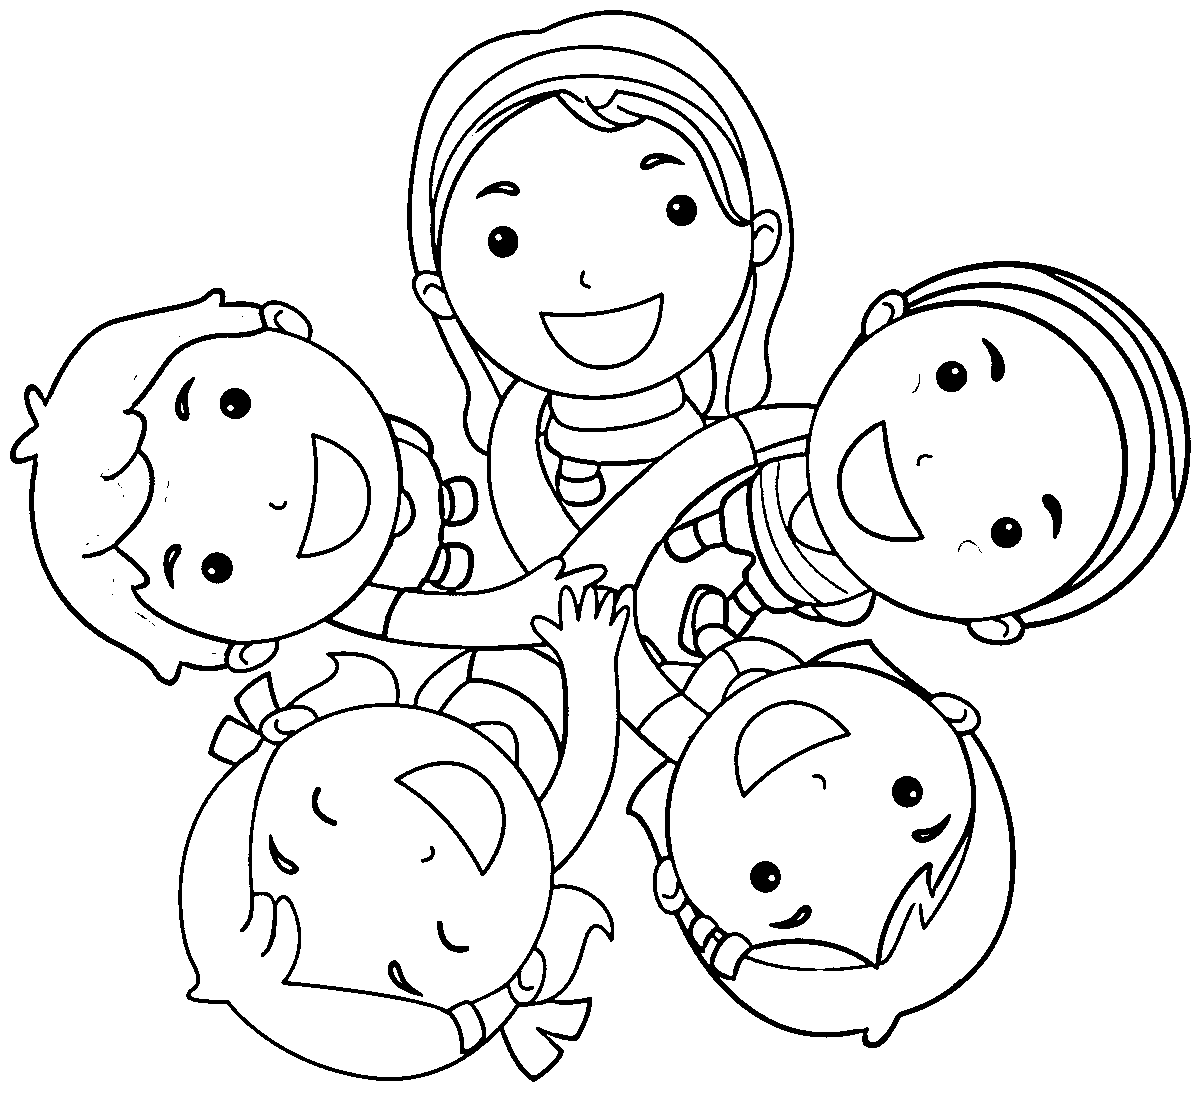 coloring pages for friendship friendship coloring pages best coloring pages for kids friendship pages for coloring 